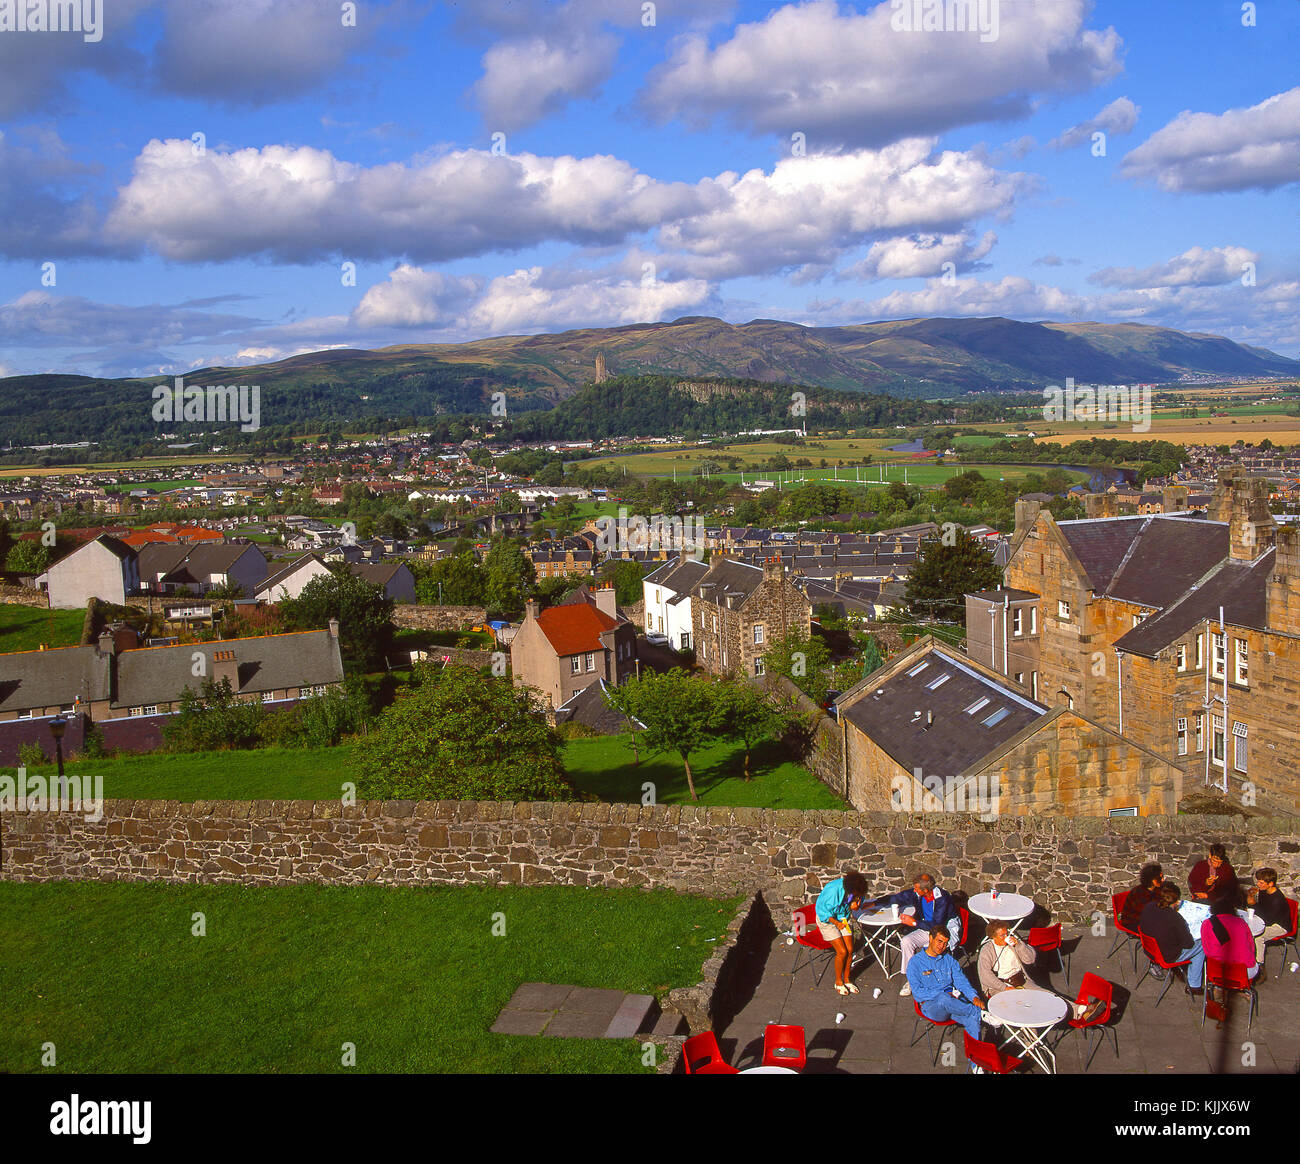 Tearoom on the castle esplanade of Stirling Castle, with a view towards the Ochil Hills, Stirling Stock Photo